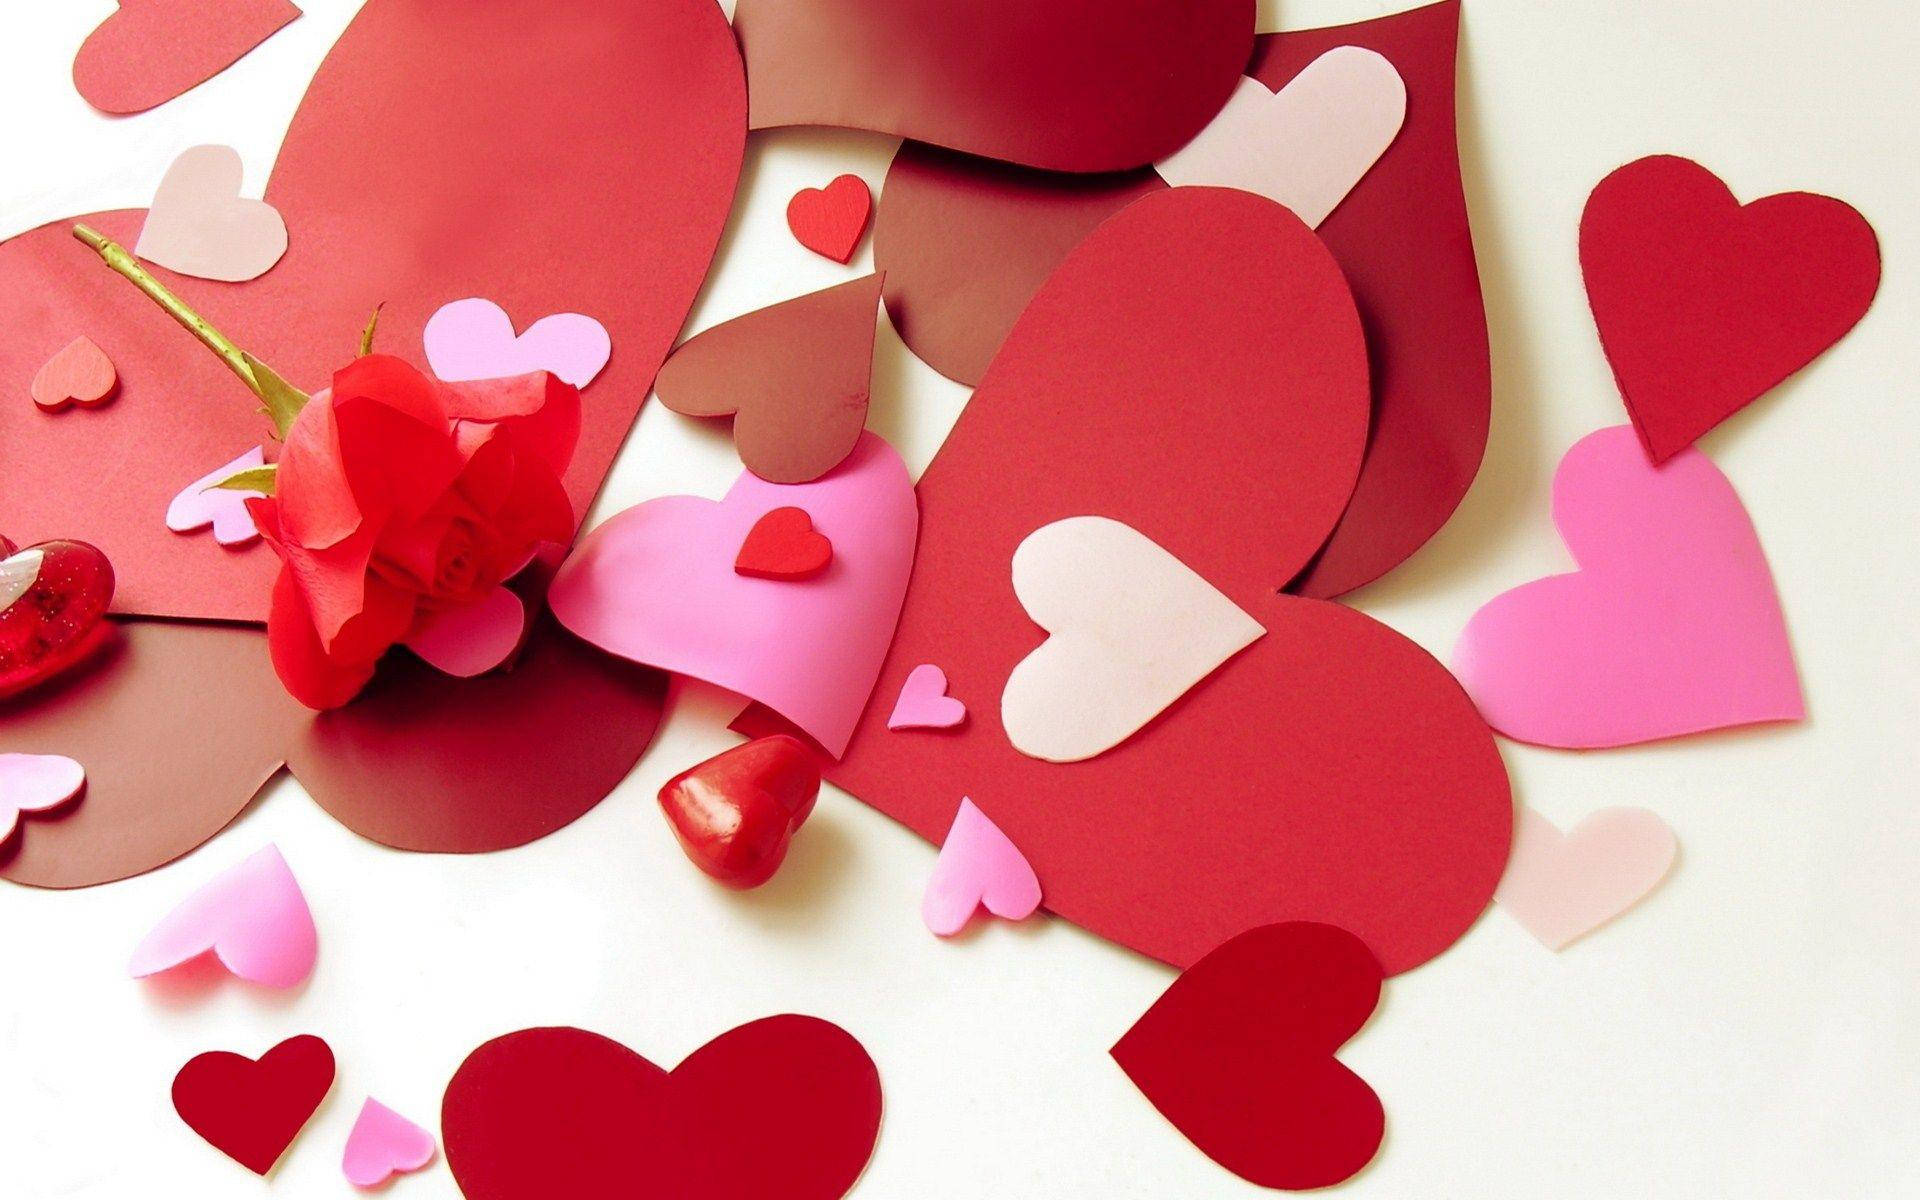 Heart Aesthetic Paper And Red Rose Background